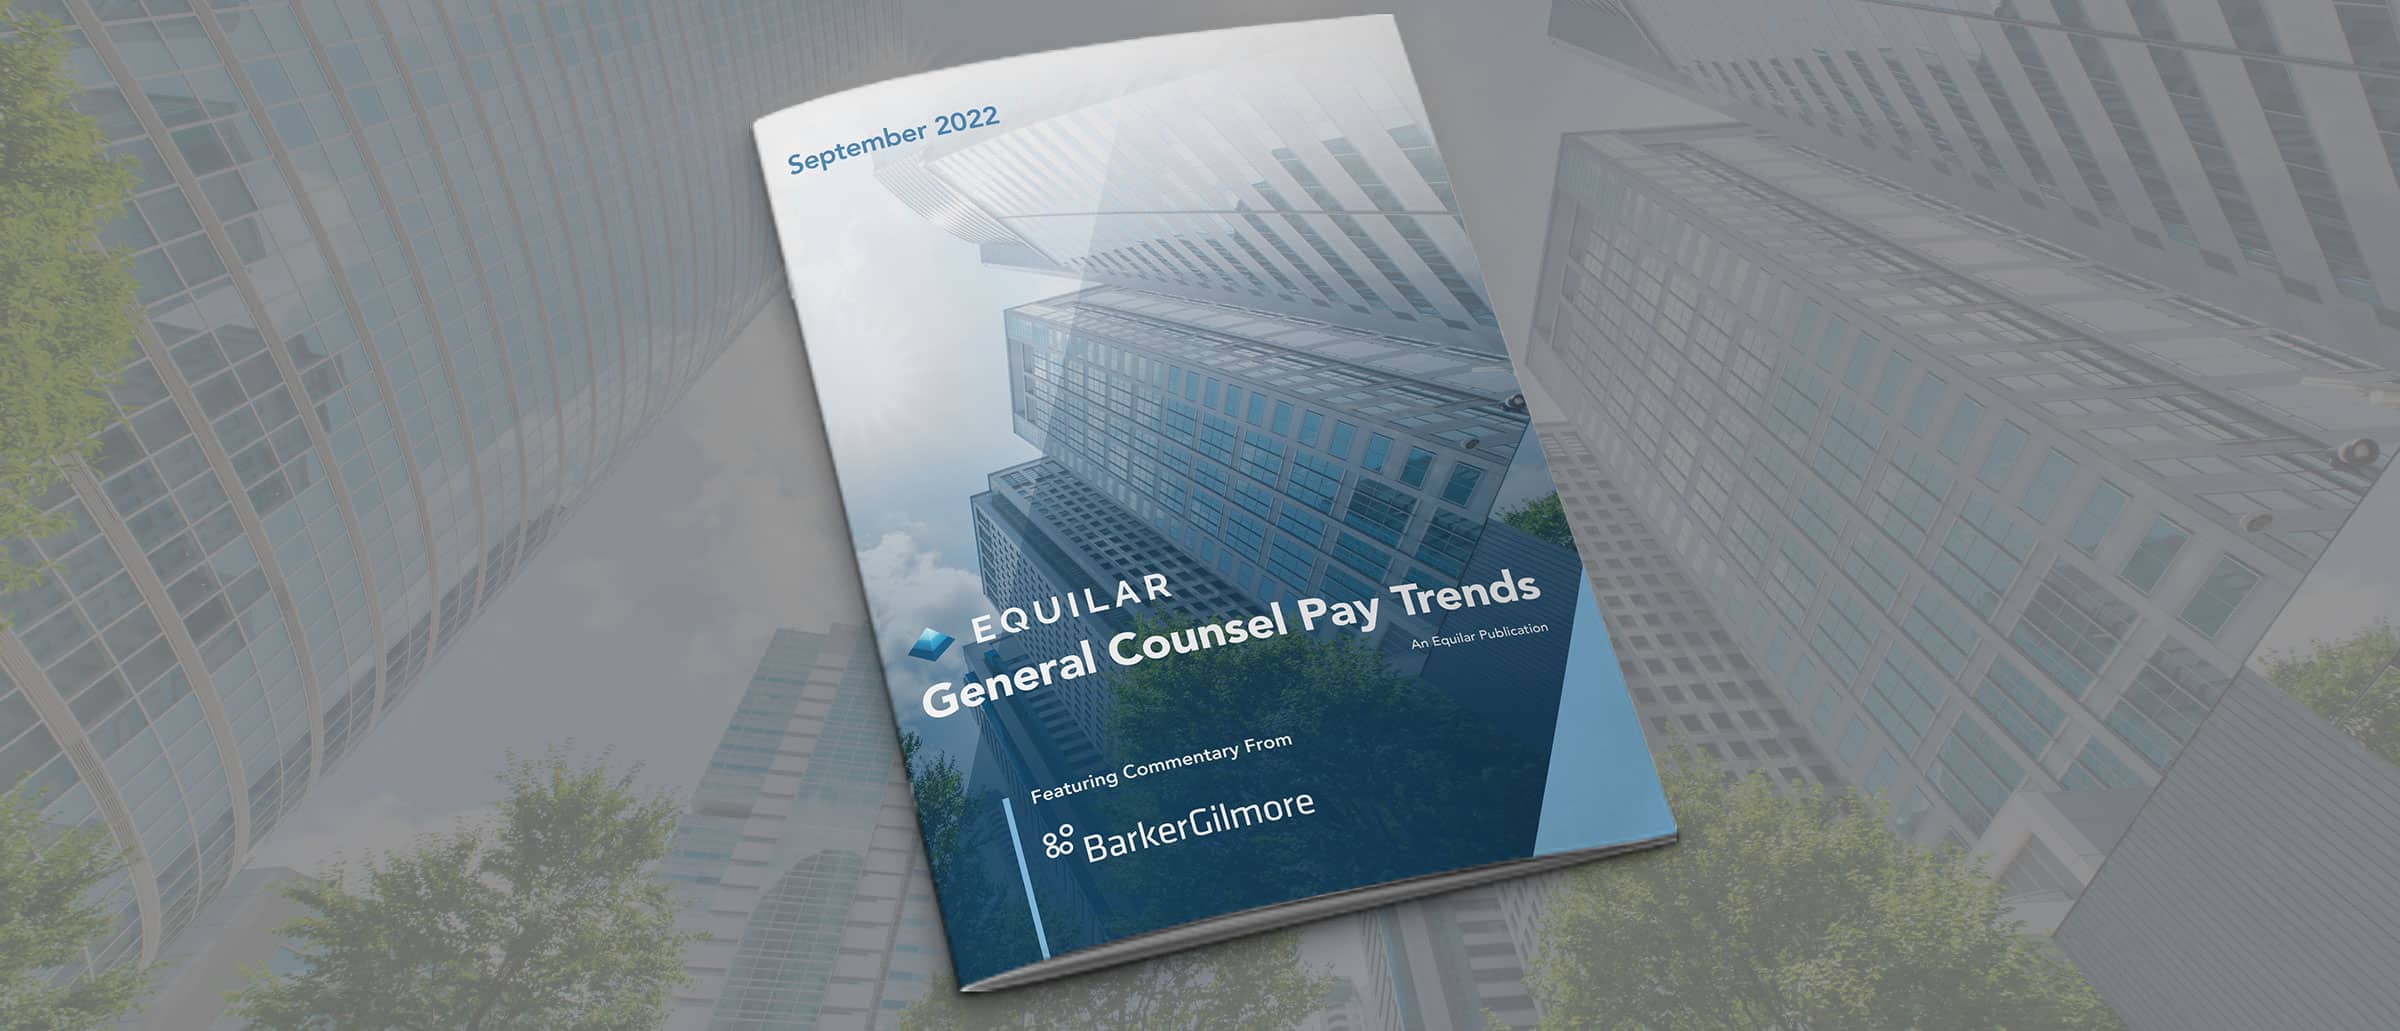 September 2022 General Counsel Pay Trends